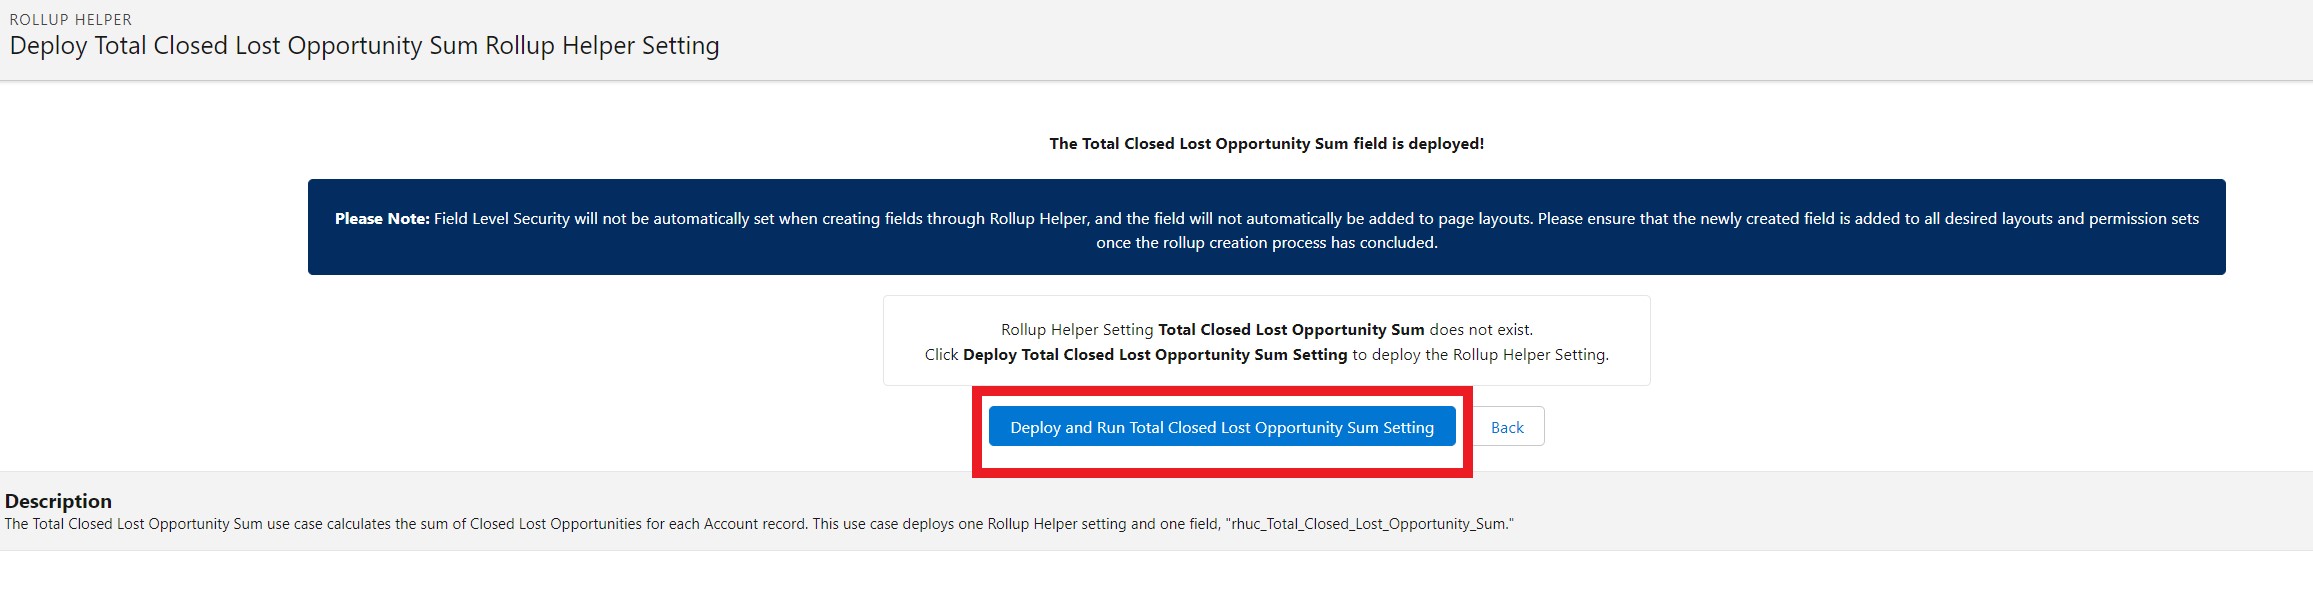 Total Closed Lost Opportunity Sum deploy setting